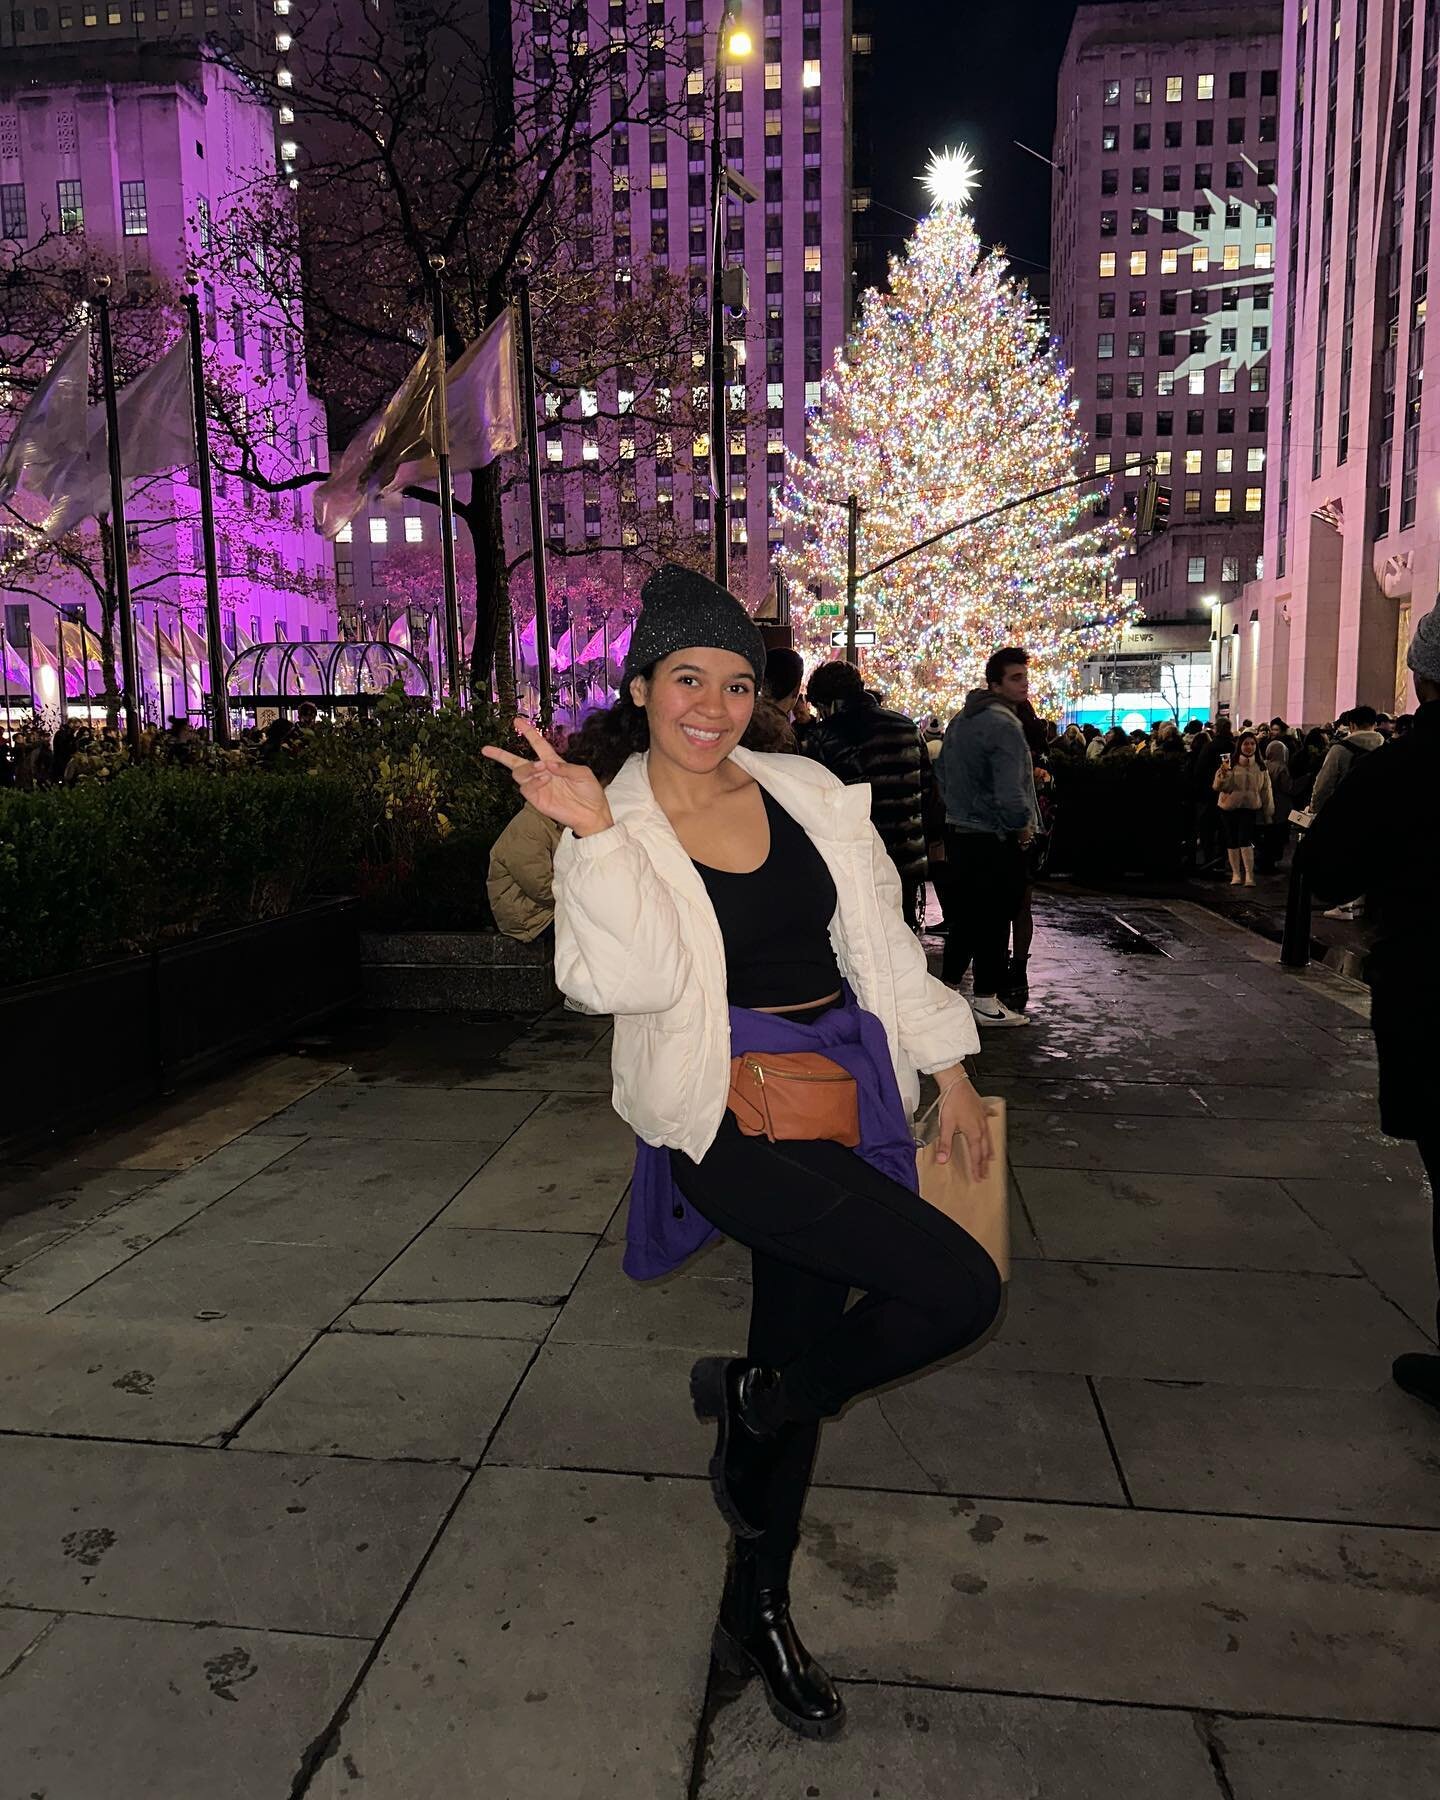 Randomly walking to the Rockefeller Christmas Tree after getting thai food with new grad @kayelin_l &gt;&gt;&gt;&gt;&gt;&gt;&gt;&gt; literally anything else

Come back to NYC soon!!!!! And congrats boo!!! 🎓 

(Catch us on the last slide!!! ❤️)
&bull